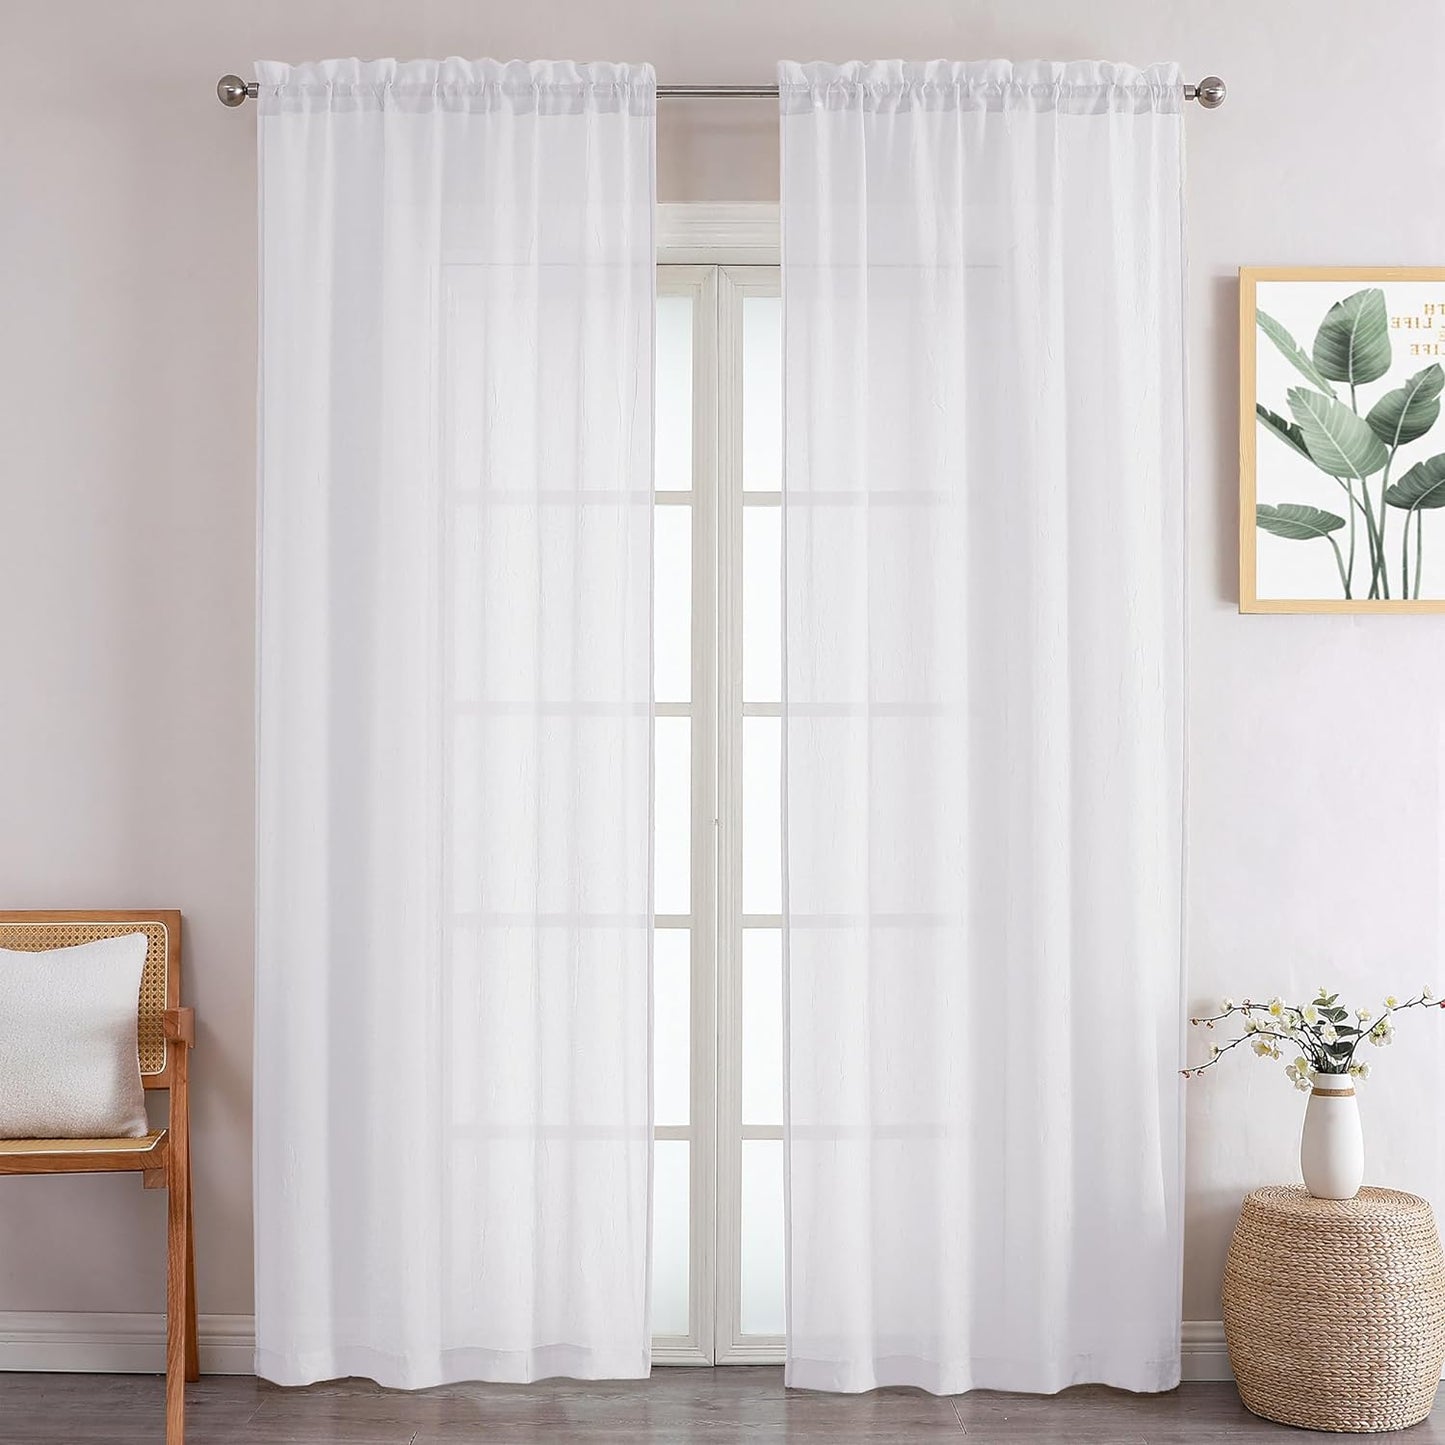 Crushed Sheer White Curtains 63 Inch Length 2 Panels, Light Filtering Solid Crinkle Voile Short Sheer Curtian for Bedroom Living Room, Each 42Wx63L Inches  Chyhomenyc White 42 W X 96 L 